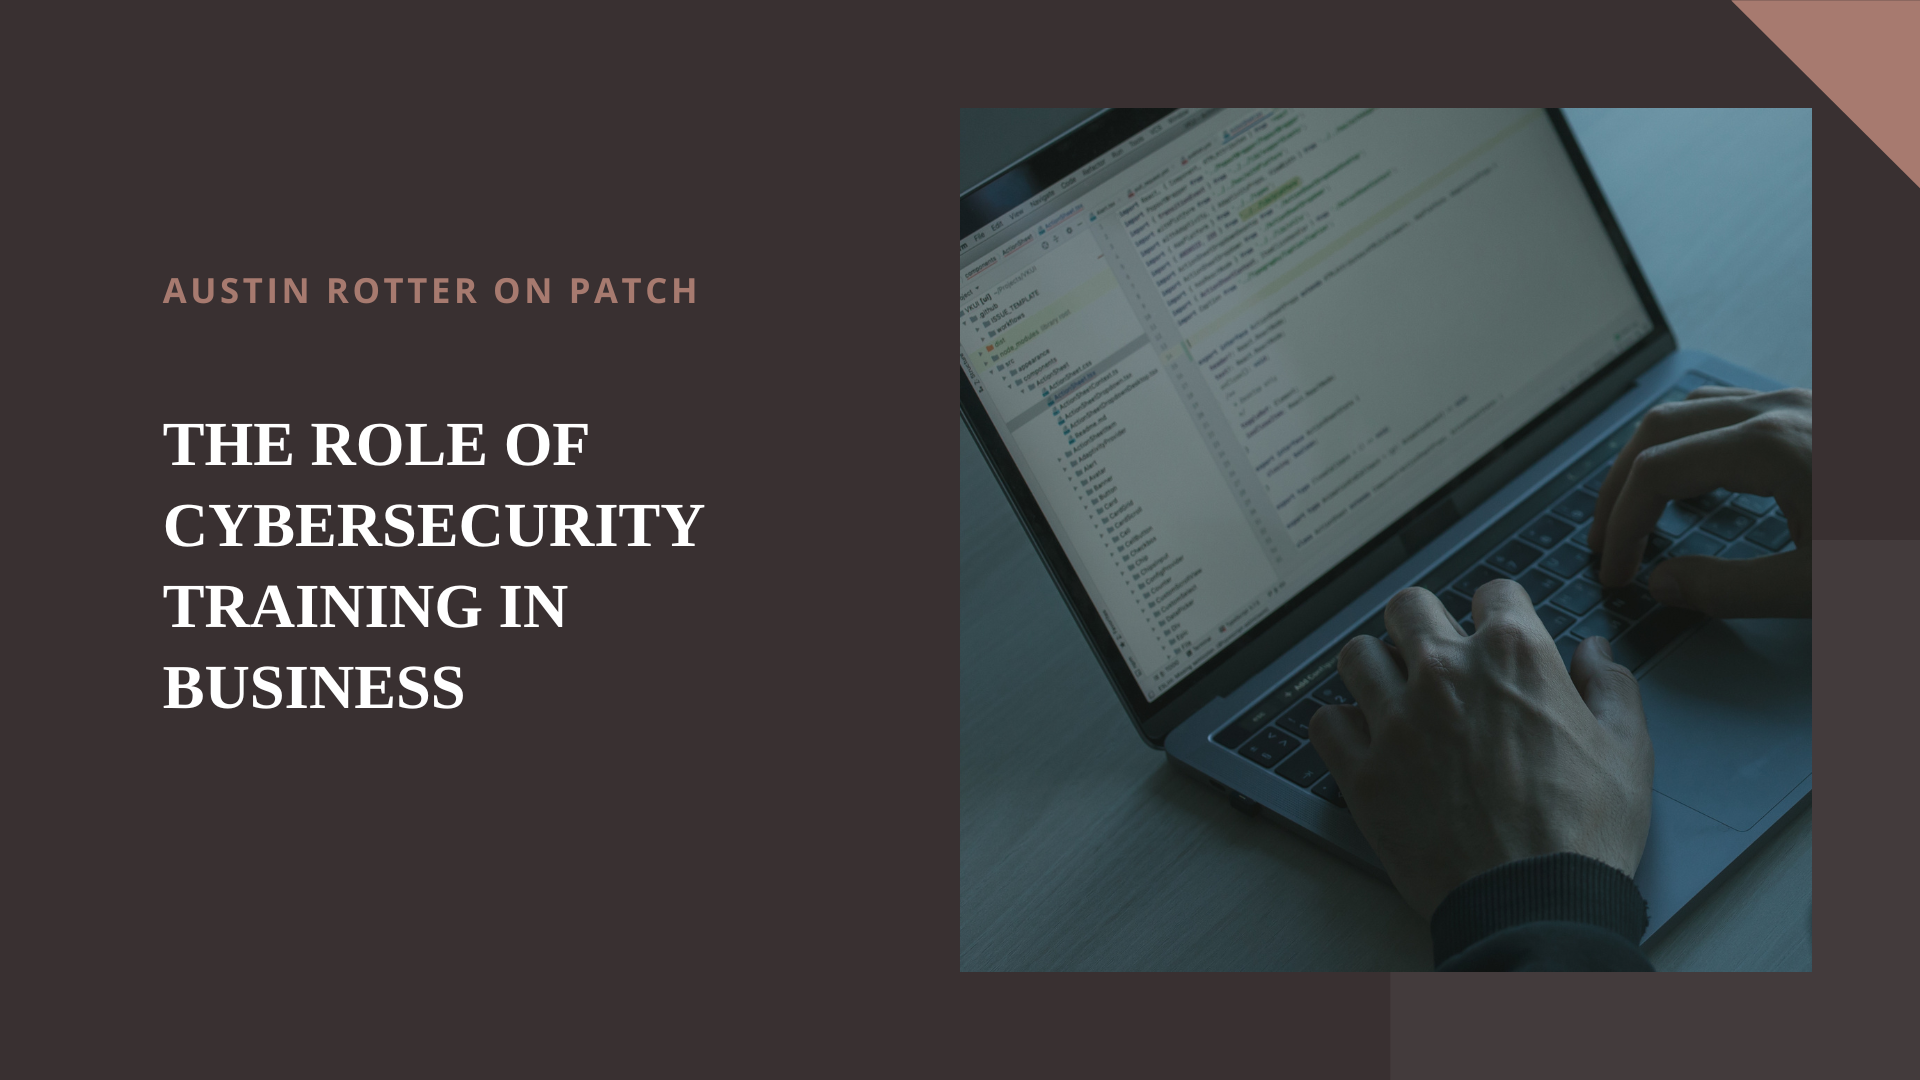 AUSTIN ROTTER ON PATCH

THE ROLE OF
CYBERSECURITY
TRAINING IN
BUSINESS